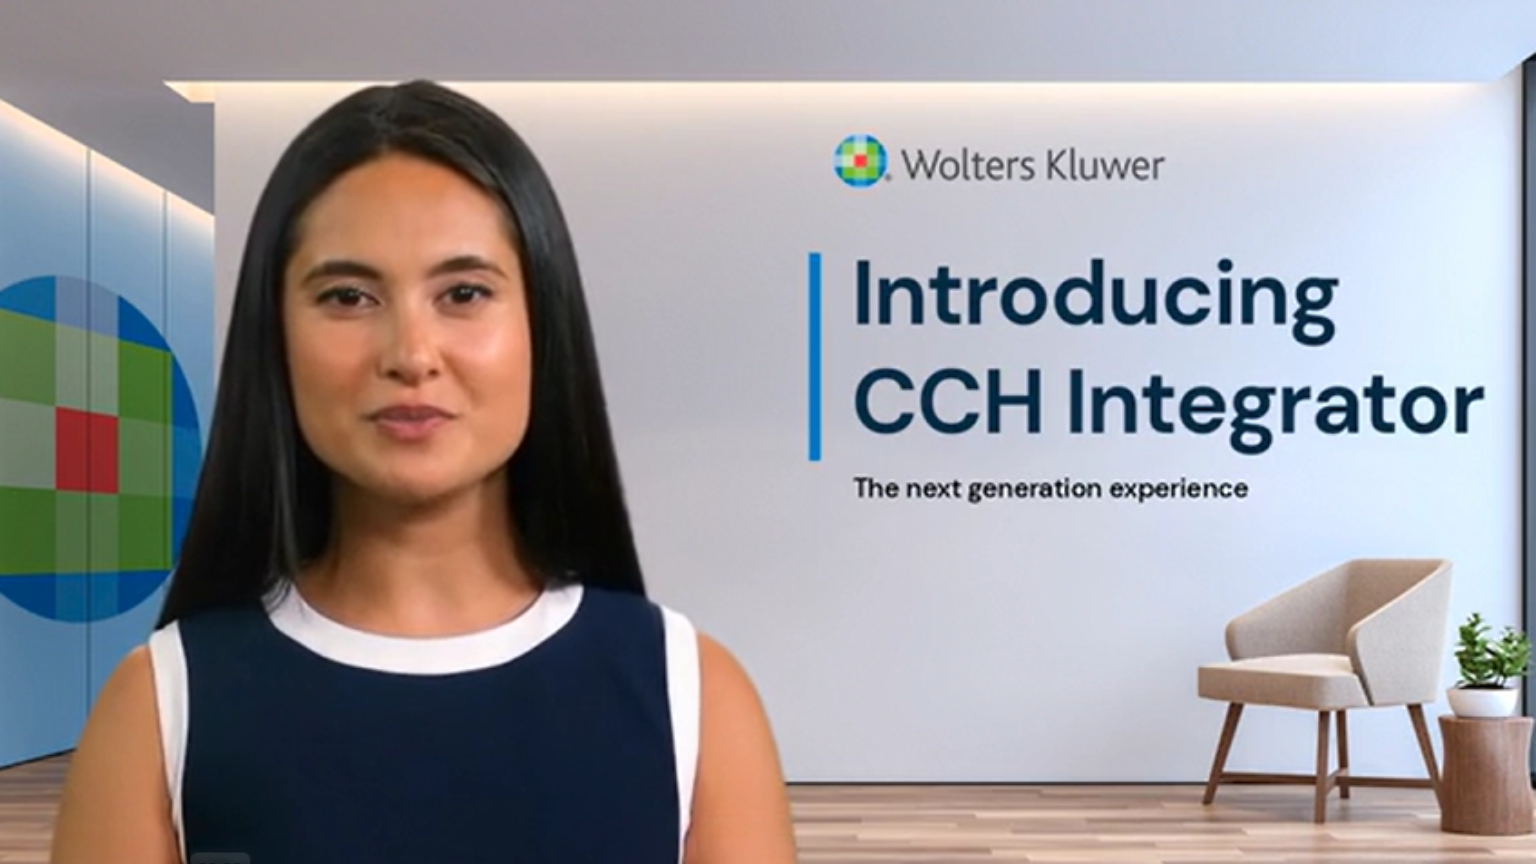 Introducing CCH Integrator